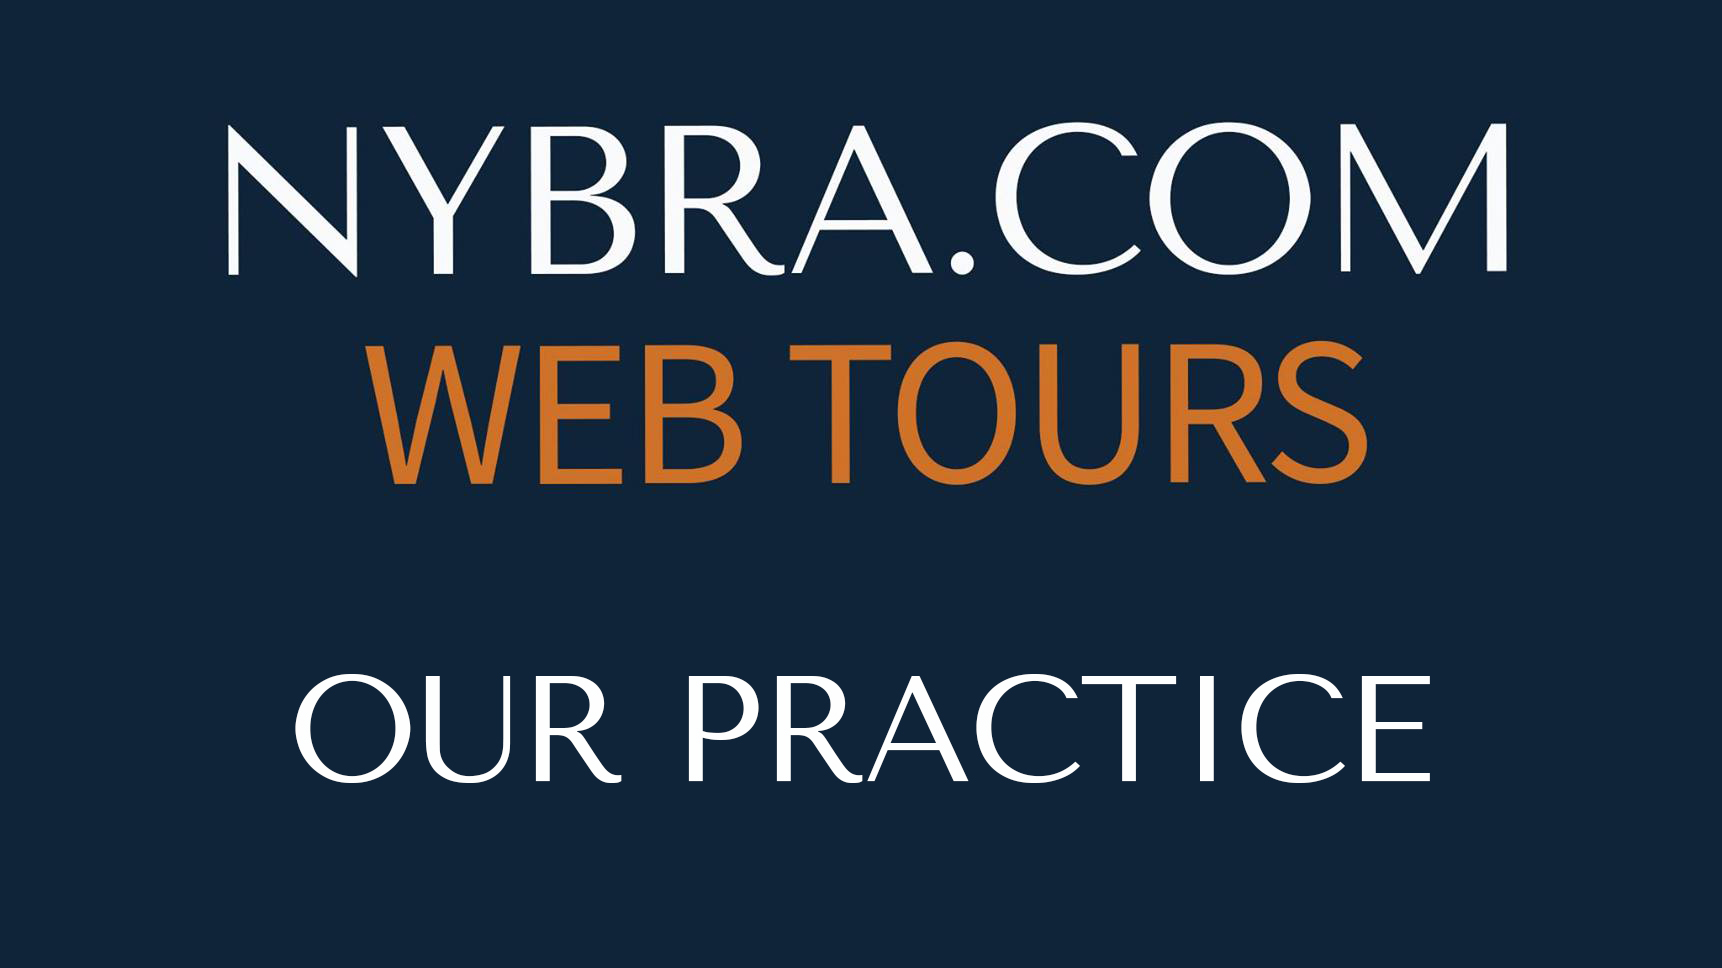 NYBRA.COM WEB TOURS: Our Practice Large Graphic